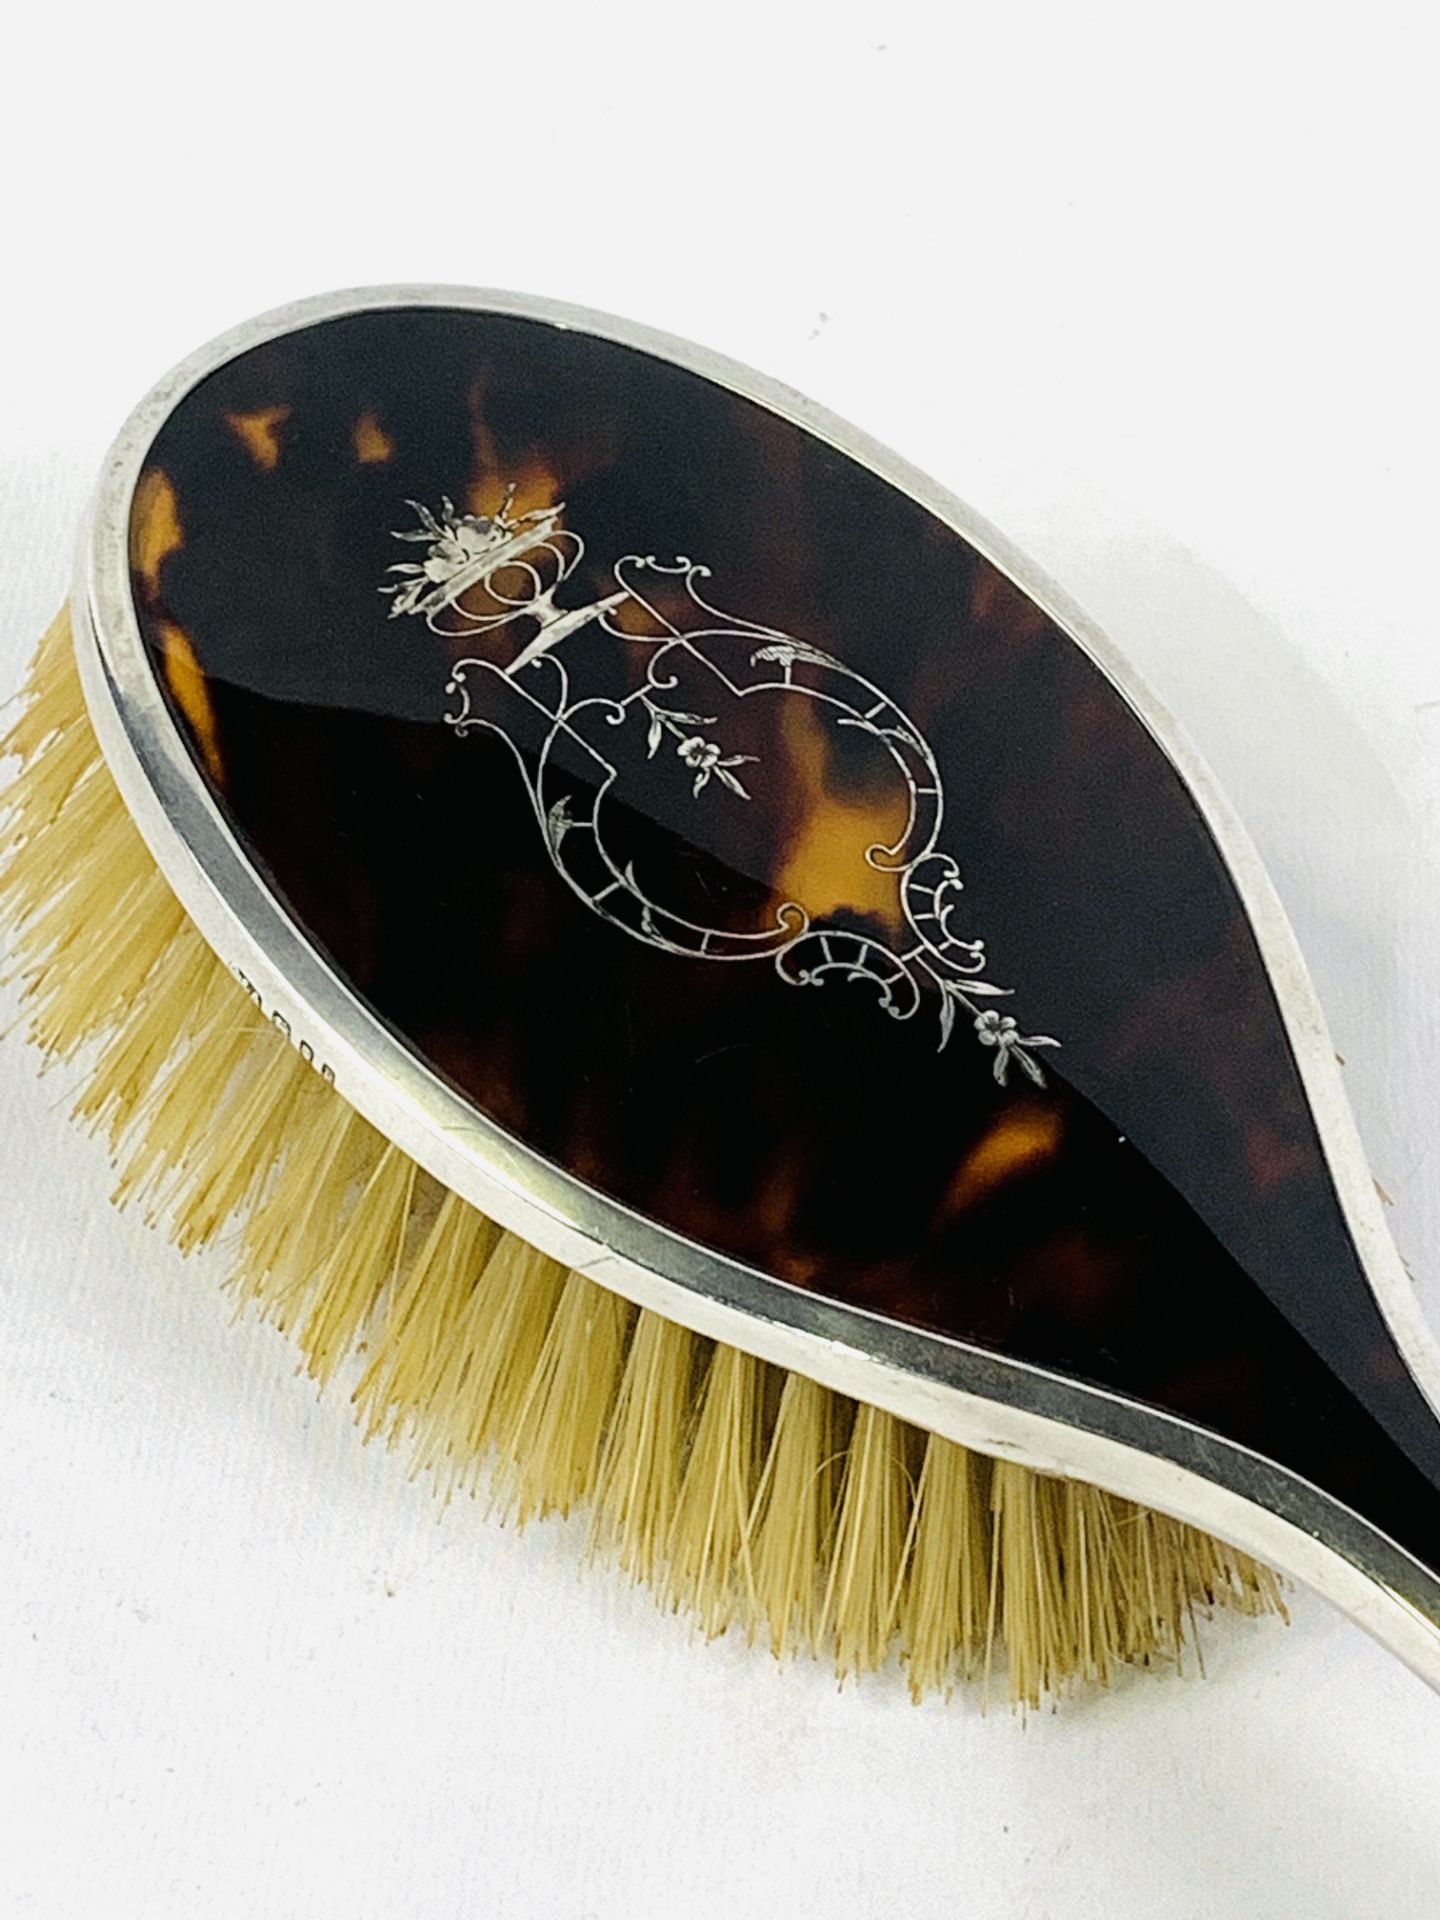 Edwardian tortoiseshell and hallmarked silver mounted and silver inlaid hairbrush - Image 2 of 4